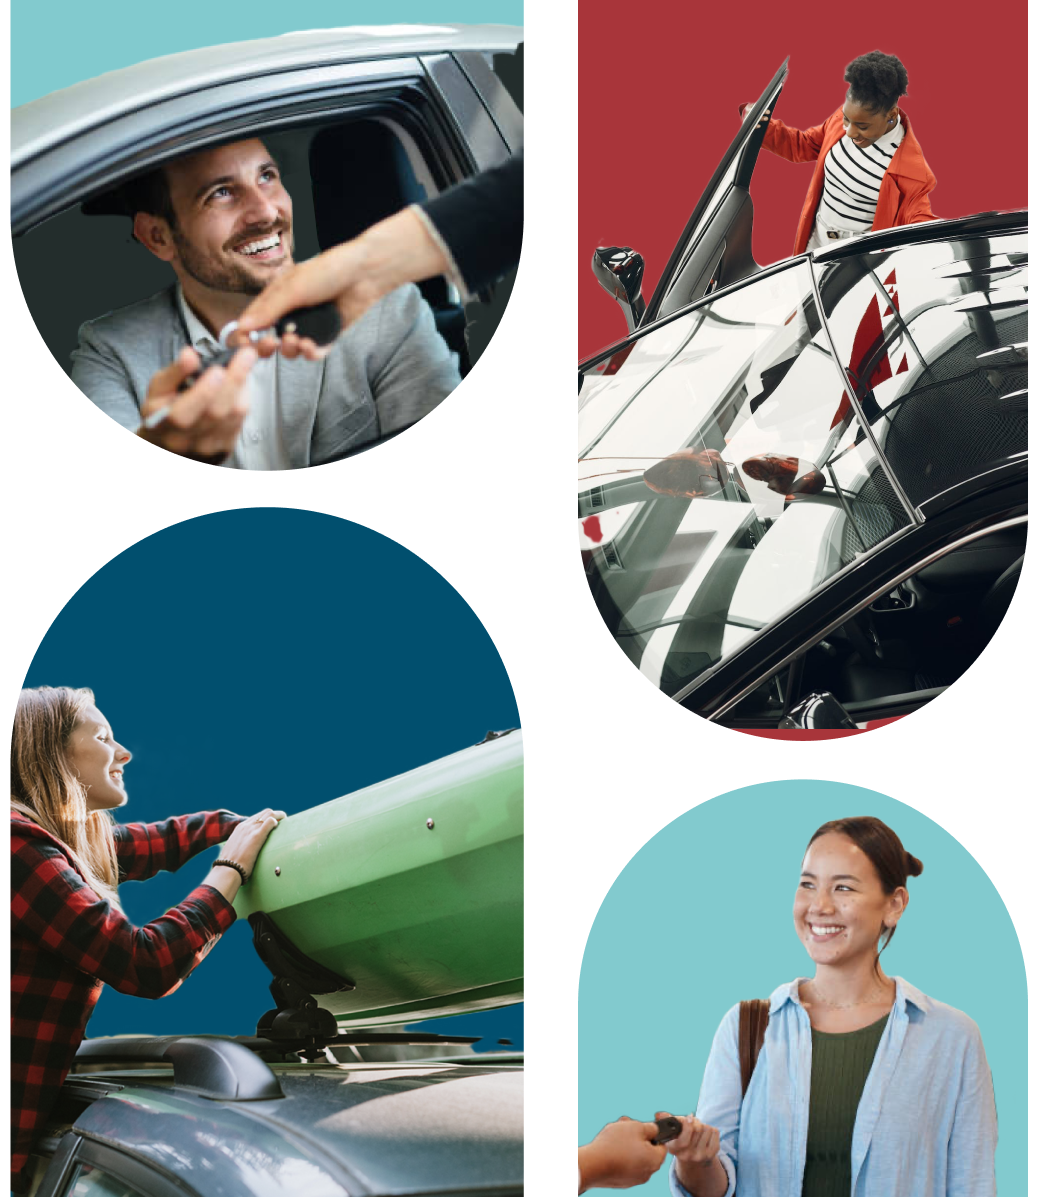 four images of people with cars